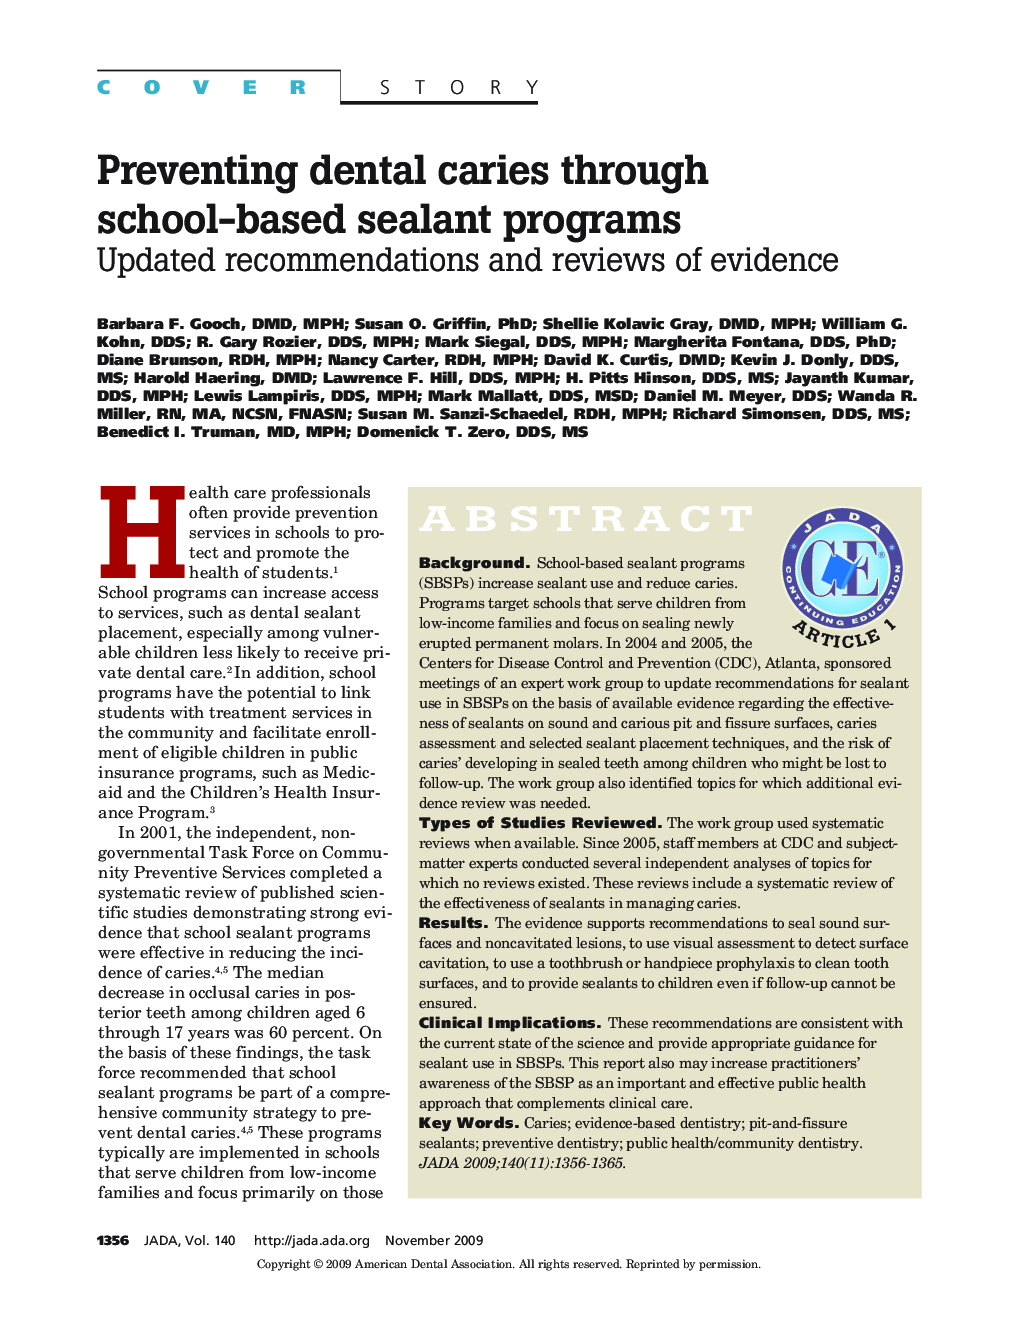 Preventing Dental Caries Through School-Based Sealant Programs : Updated Recommendations and Reviews of Evidence